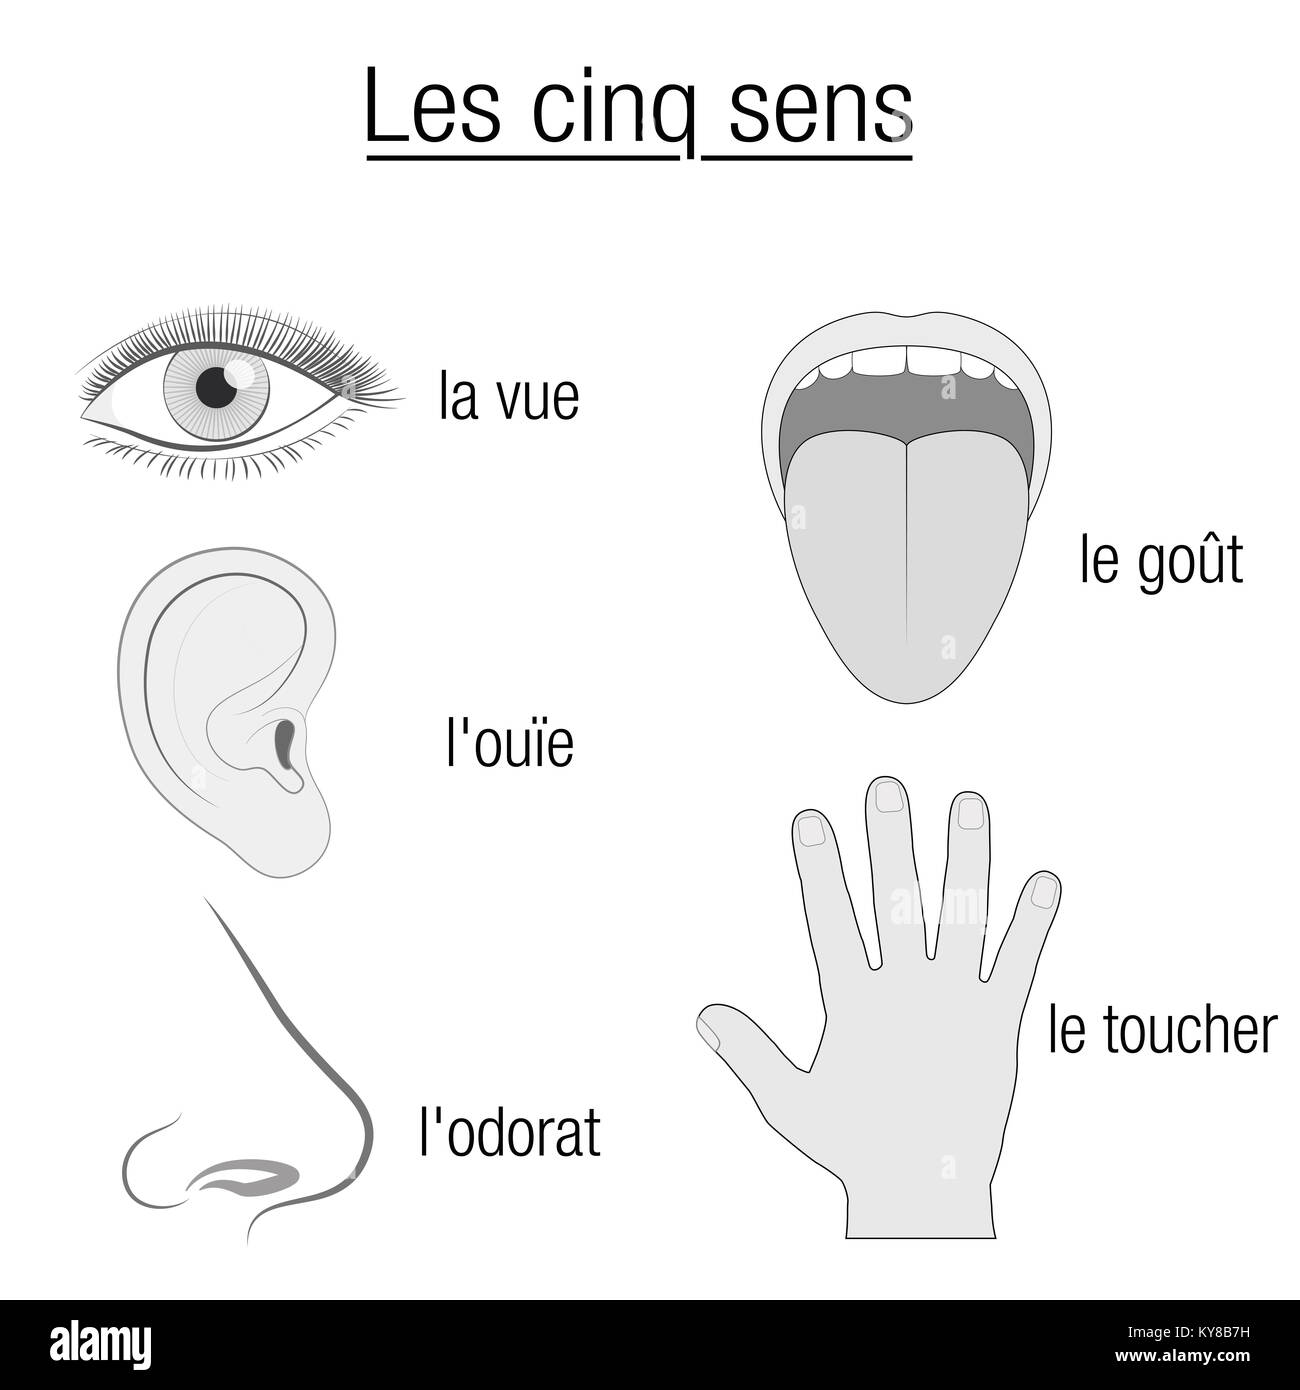 Five senses, FRENCH NAMES - chart with sensory organs eye, ear, tongue, nose and hand and appropriate designation sight, hearing, taste, smell, touch. Stock Photo